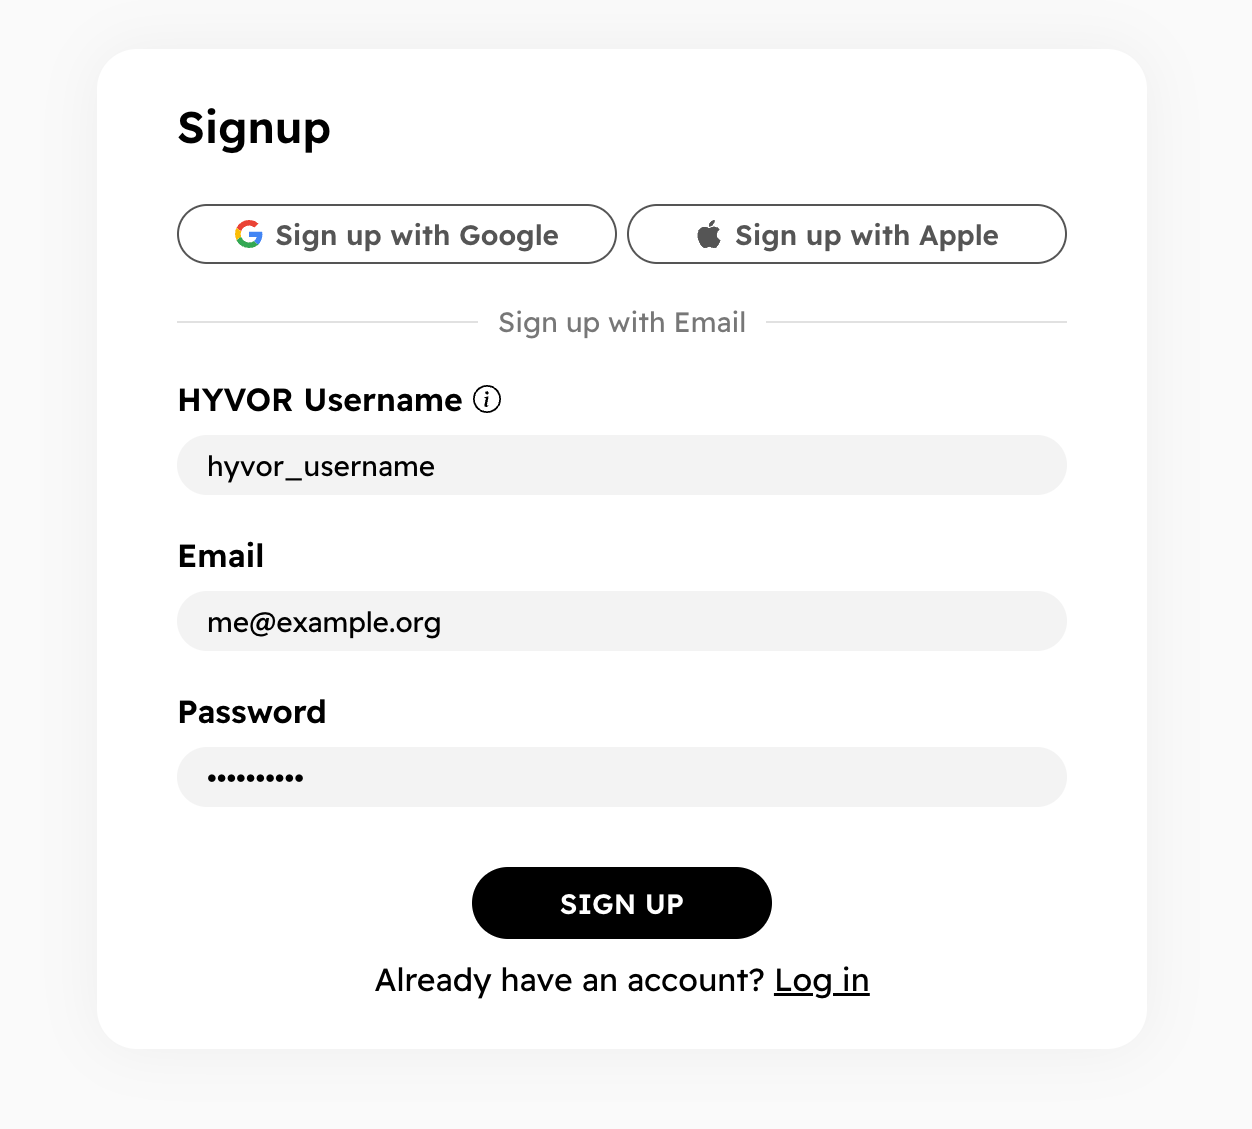 Signup to HYVOR